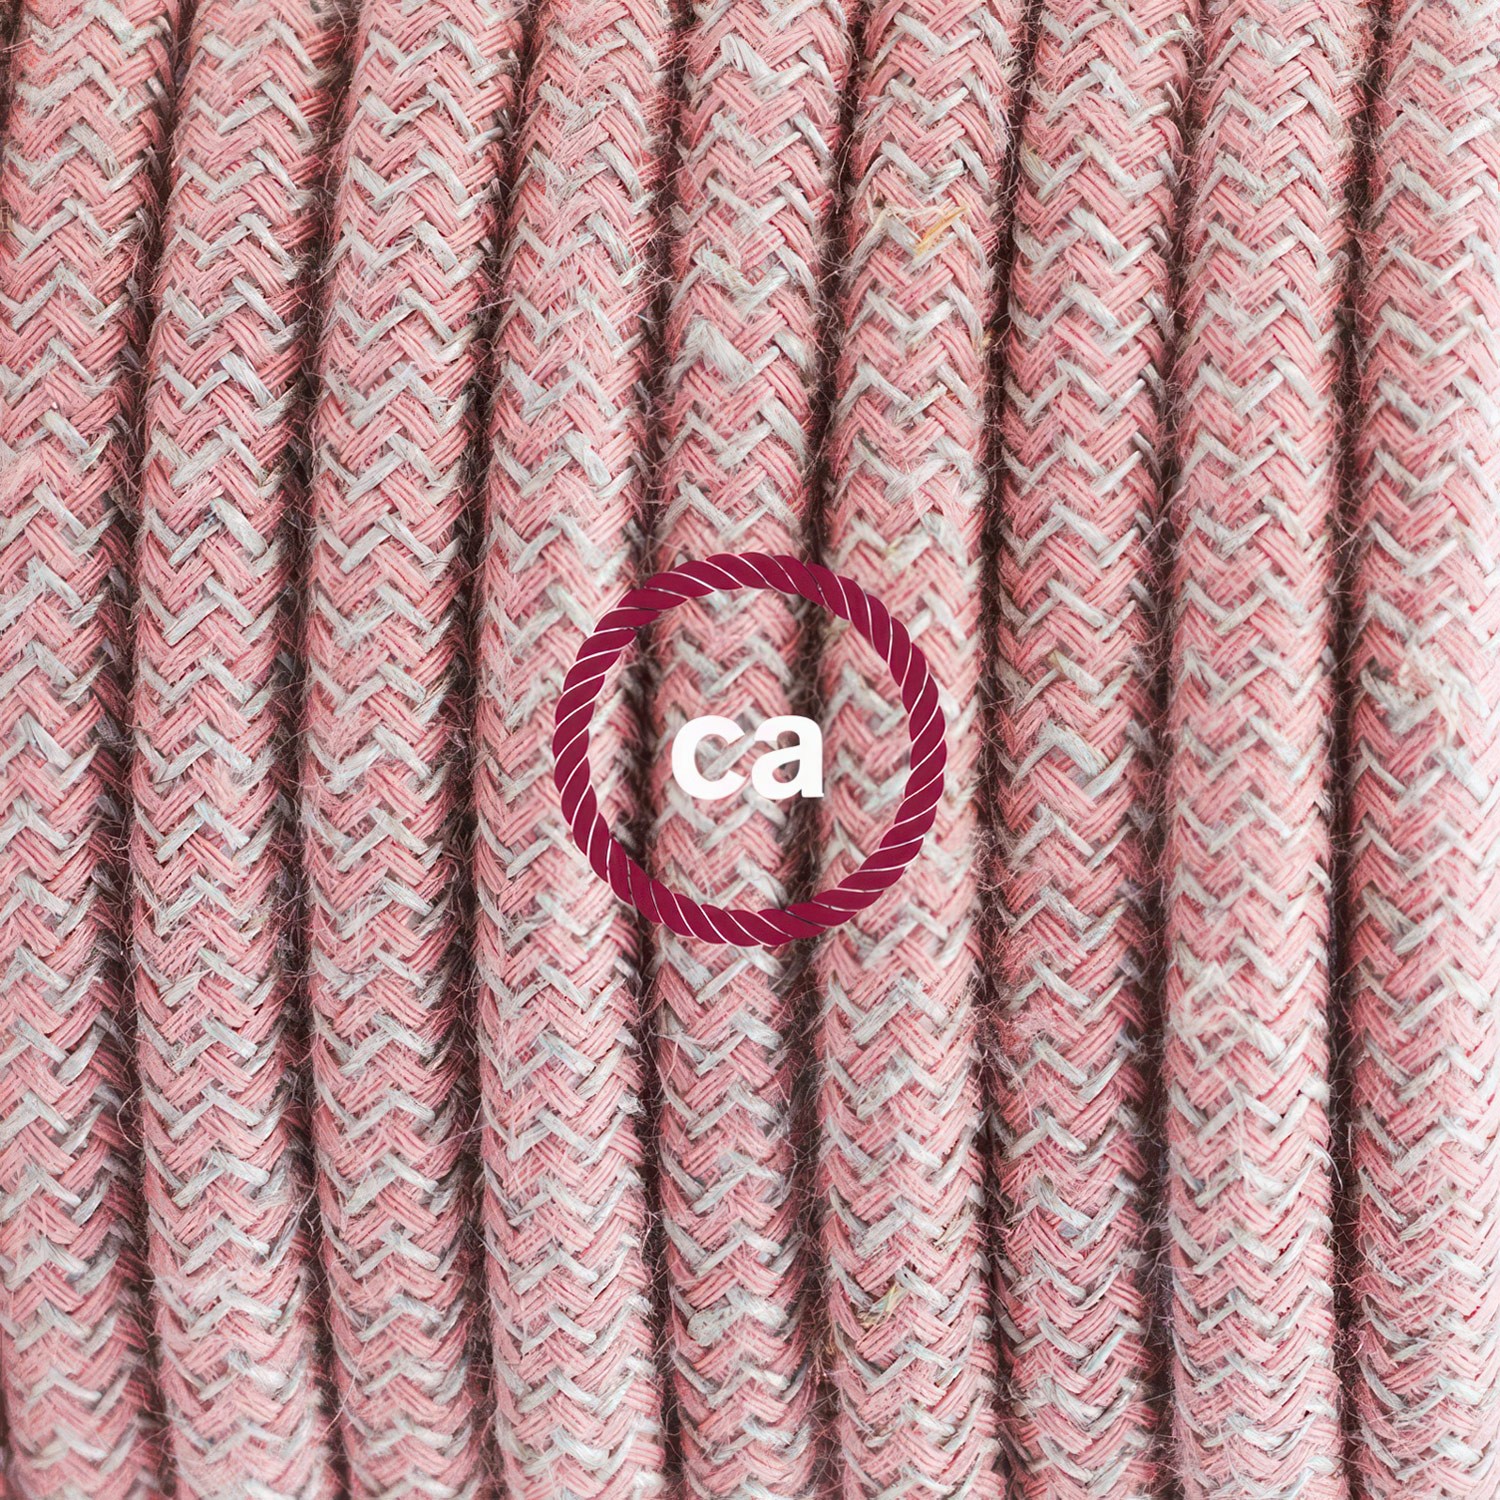 Wiring Pedestal, RD71 Ancient Pink ZigZag Cotton and Natural Linen 3 m. Choose the colour of the switch and plug.